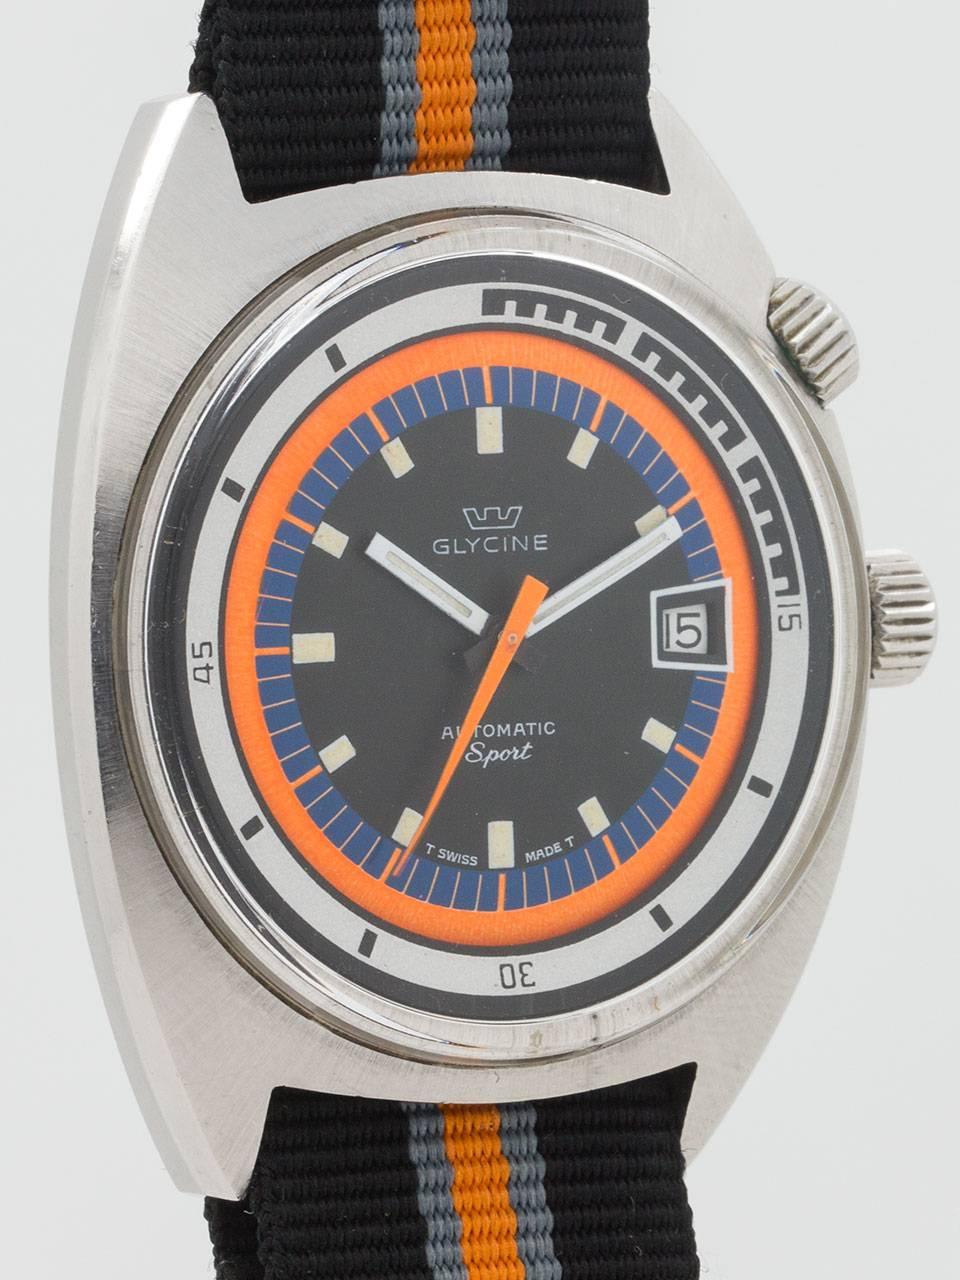 Extremely rare variation of the popular Glycine Airman SST 24 hour model but the “Sport” 12 hour version. Featuring a large 41.5 x 50mm stainless steel cushion shaped case in exceptional mint condition, with dual crowns and acrylic crystal. Bright